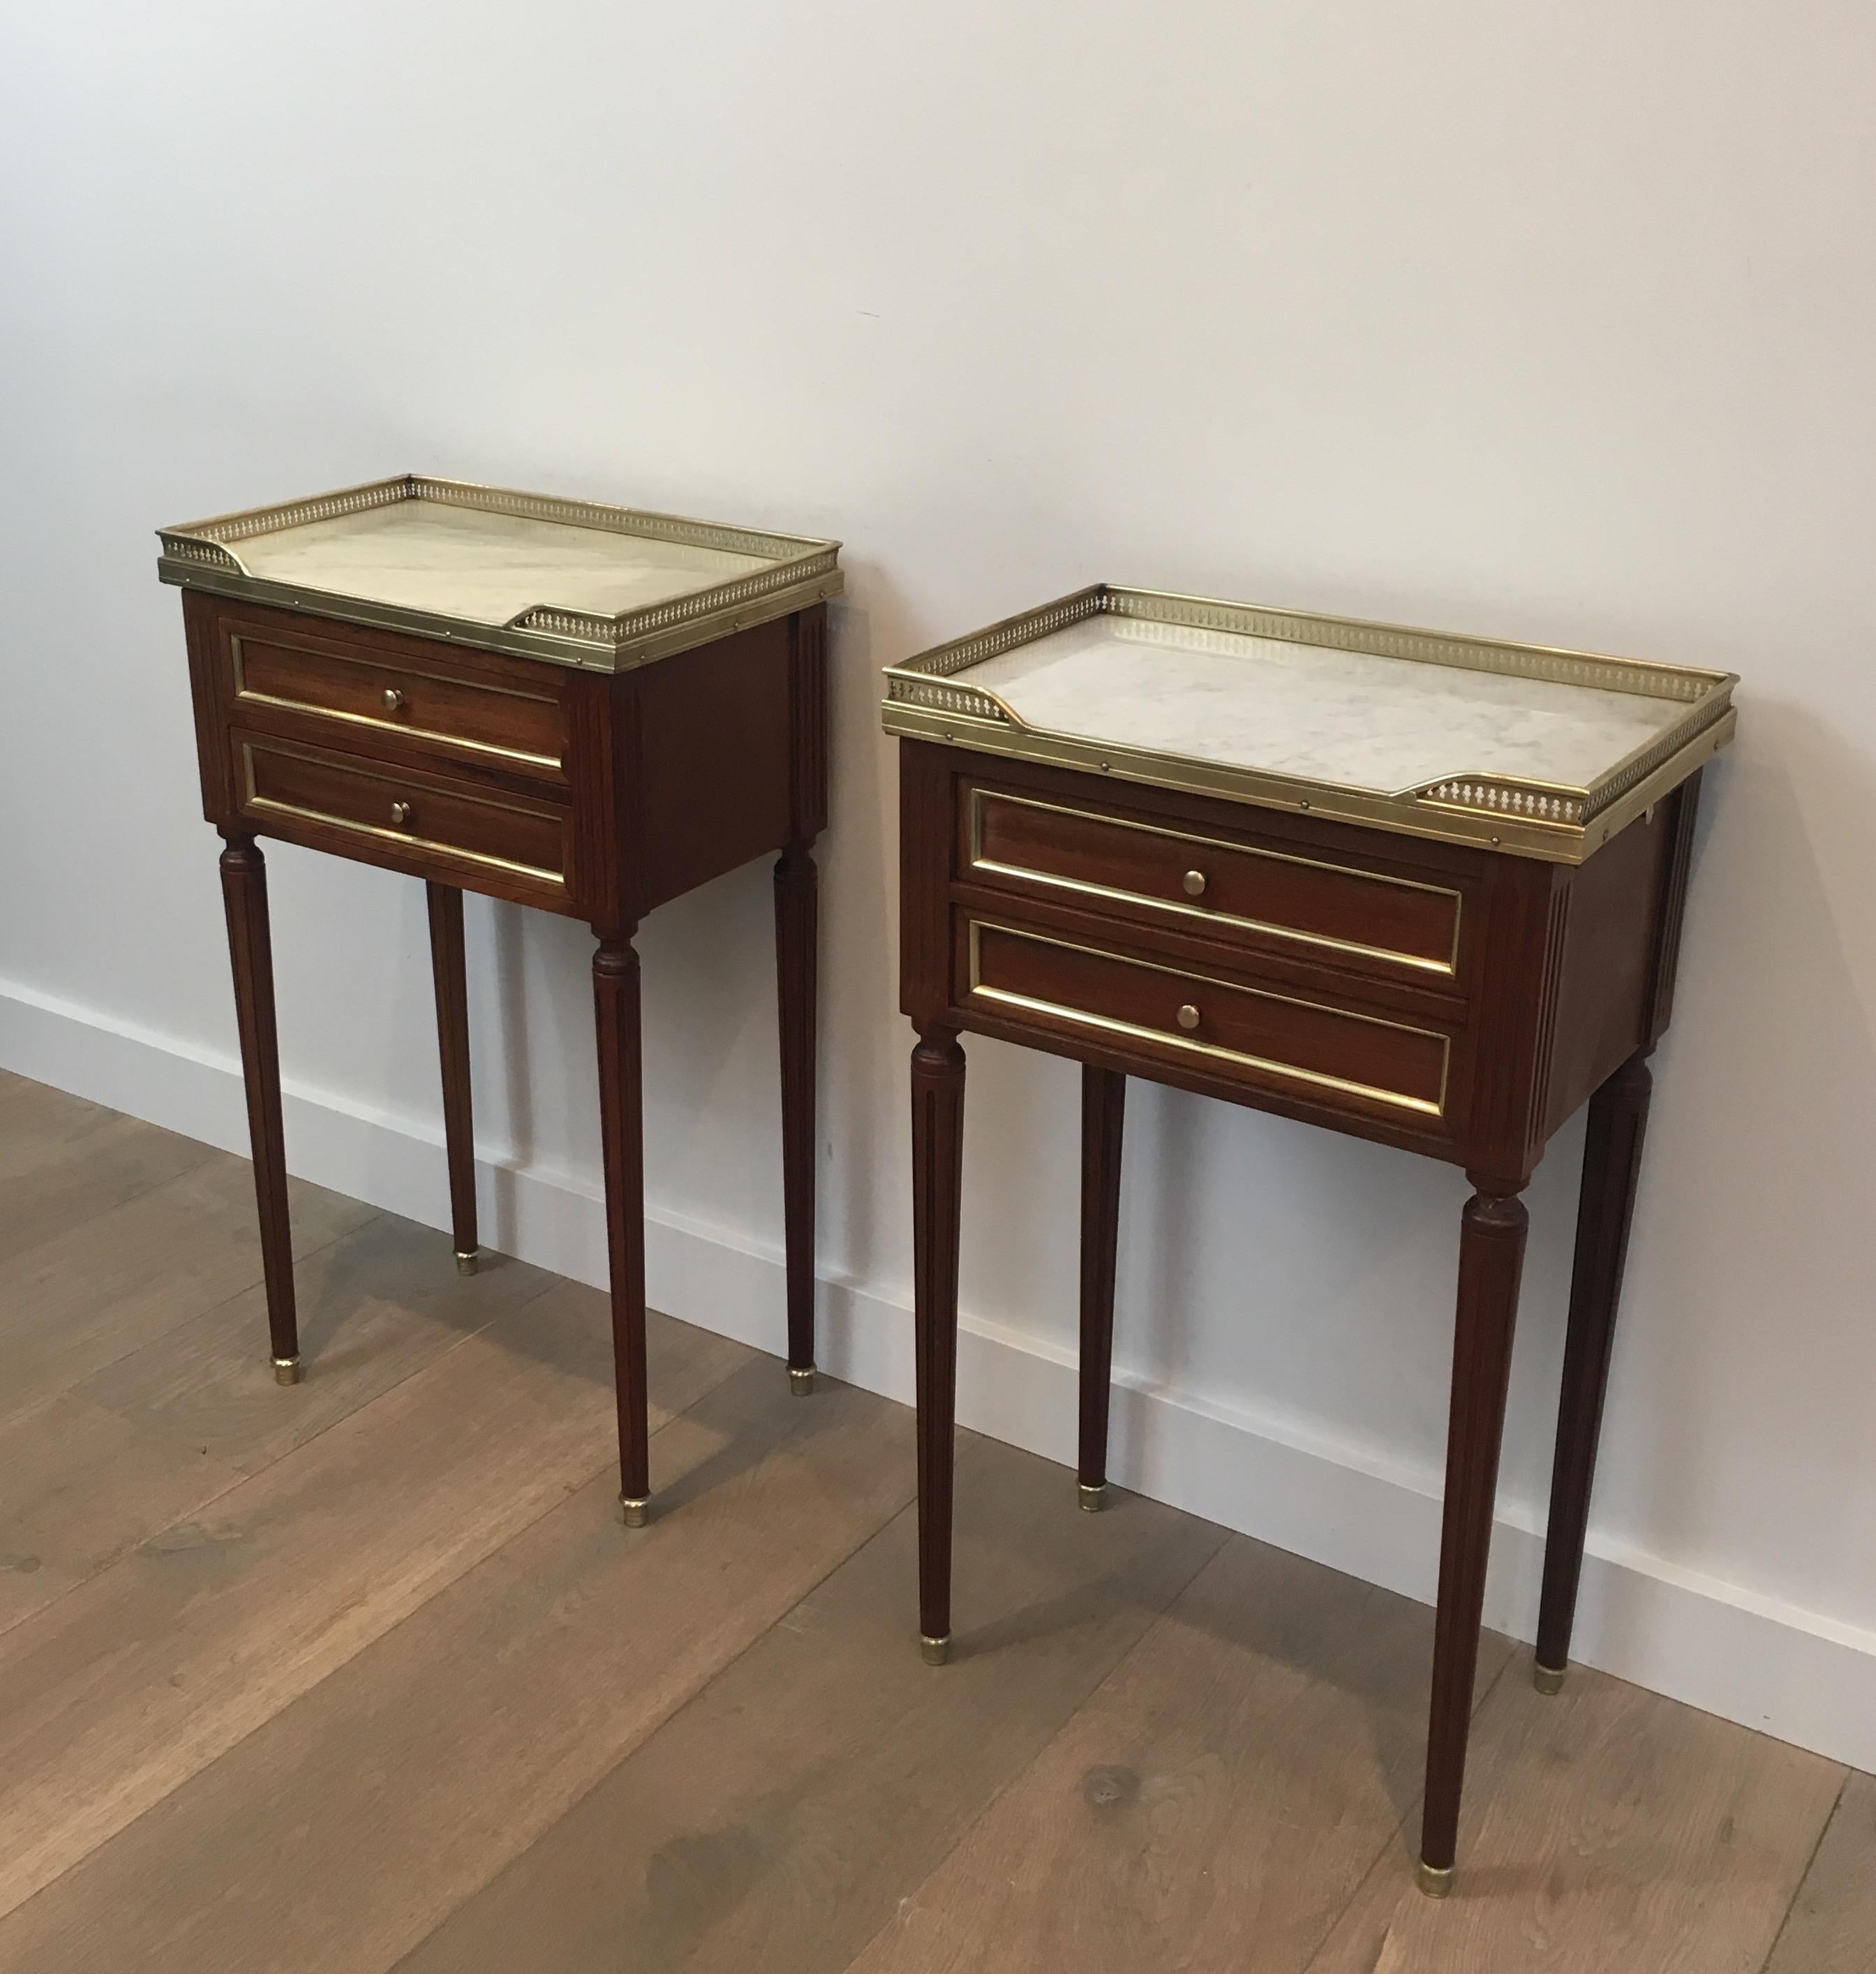 This pair of neoclassical style side tables is made of mahogany and brass with white marble tops. On the side of each end table, there is a sliding shelve with a leather on top. The color of the marble is a slightly different on each side table but